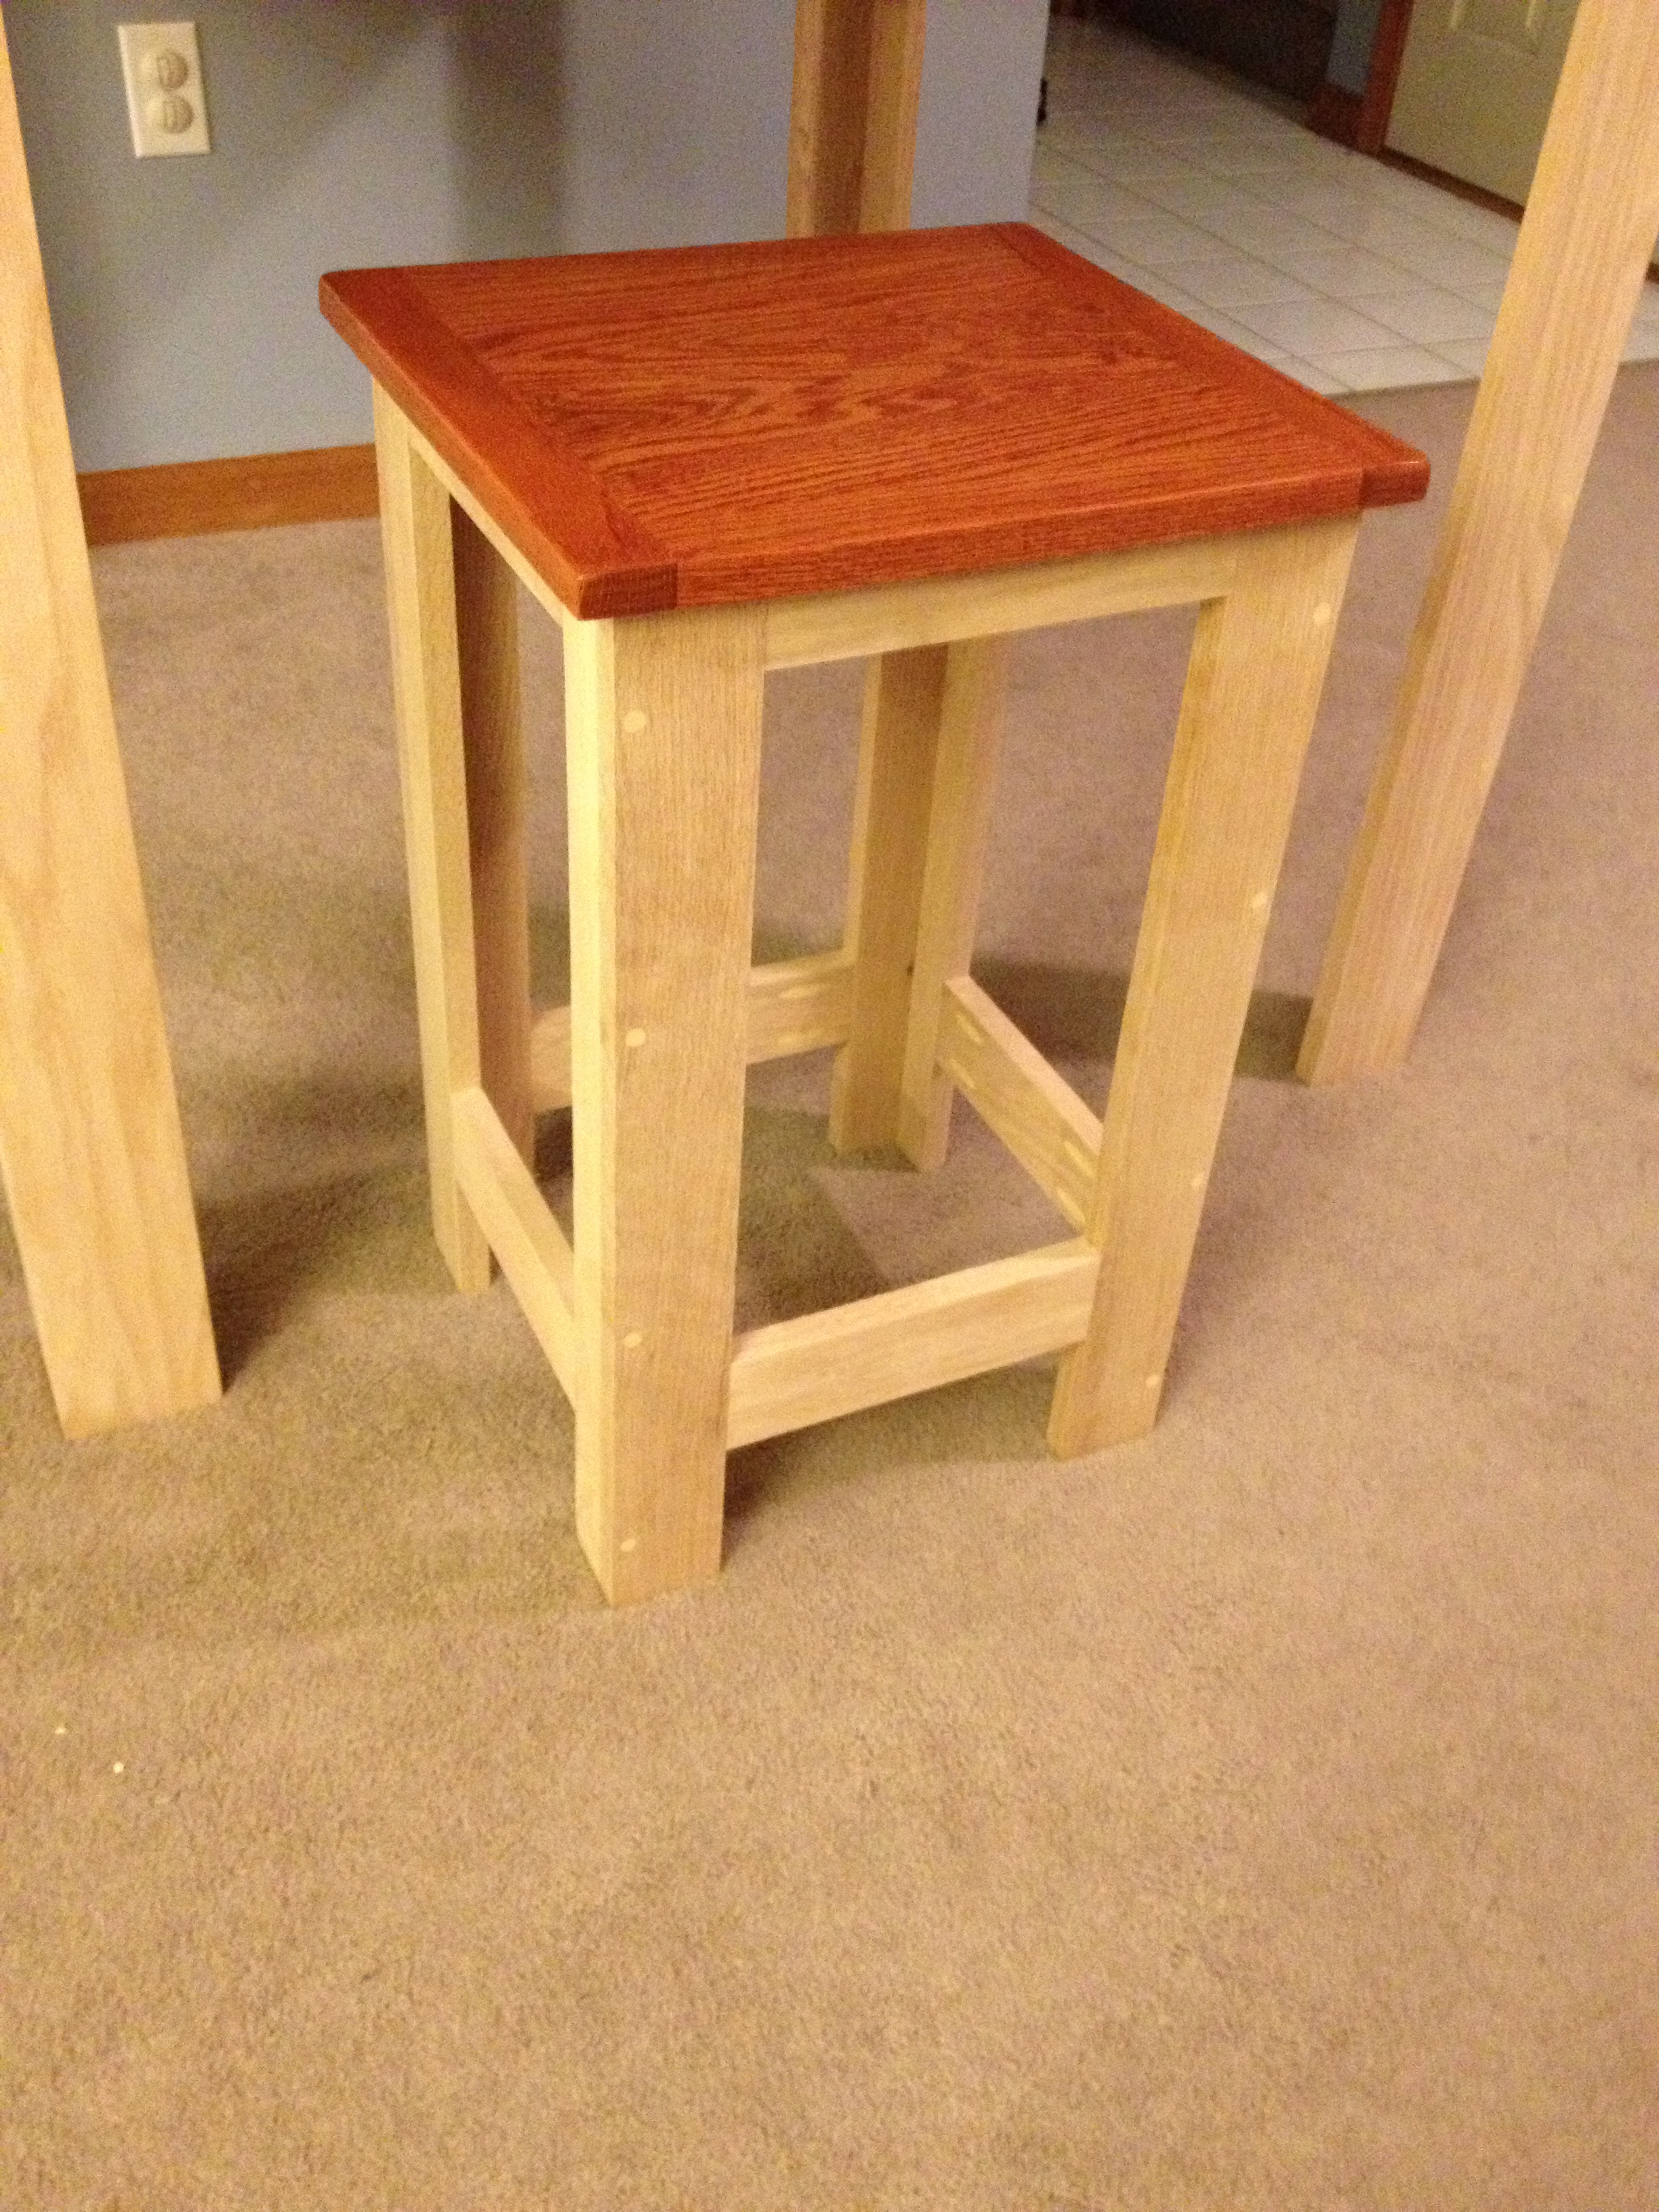 Ana White Pub table Stools - DIY Projects